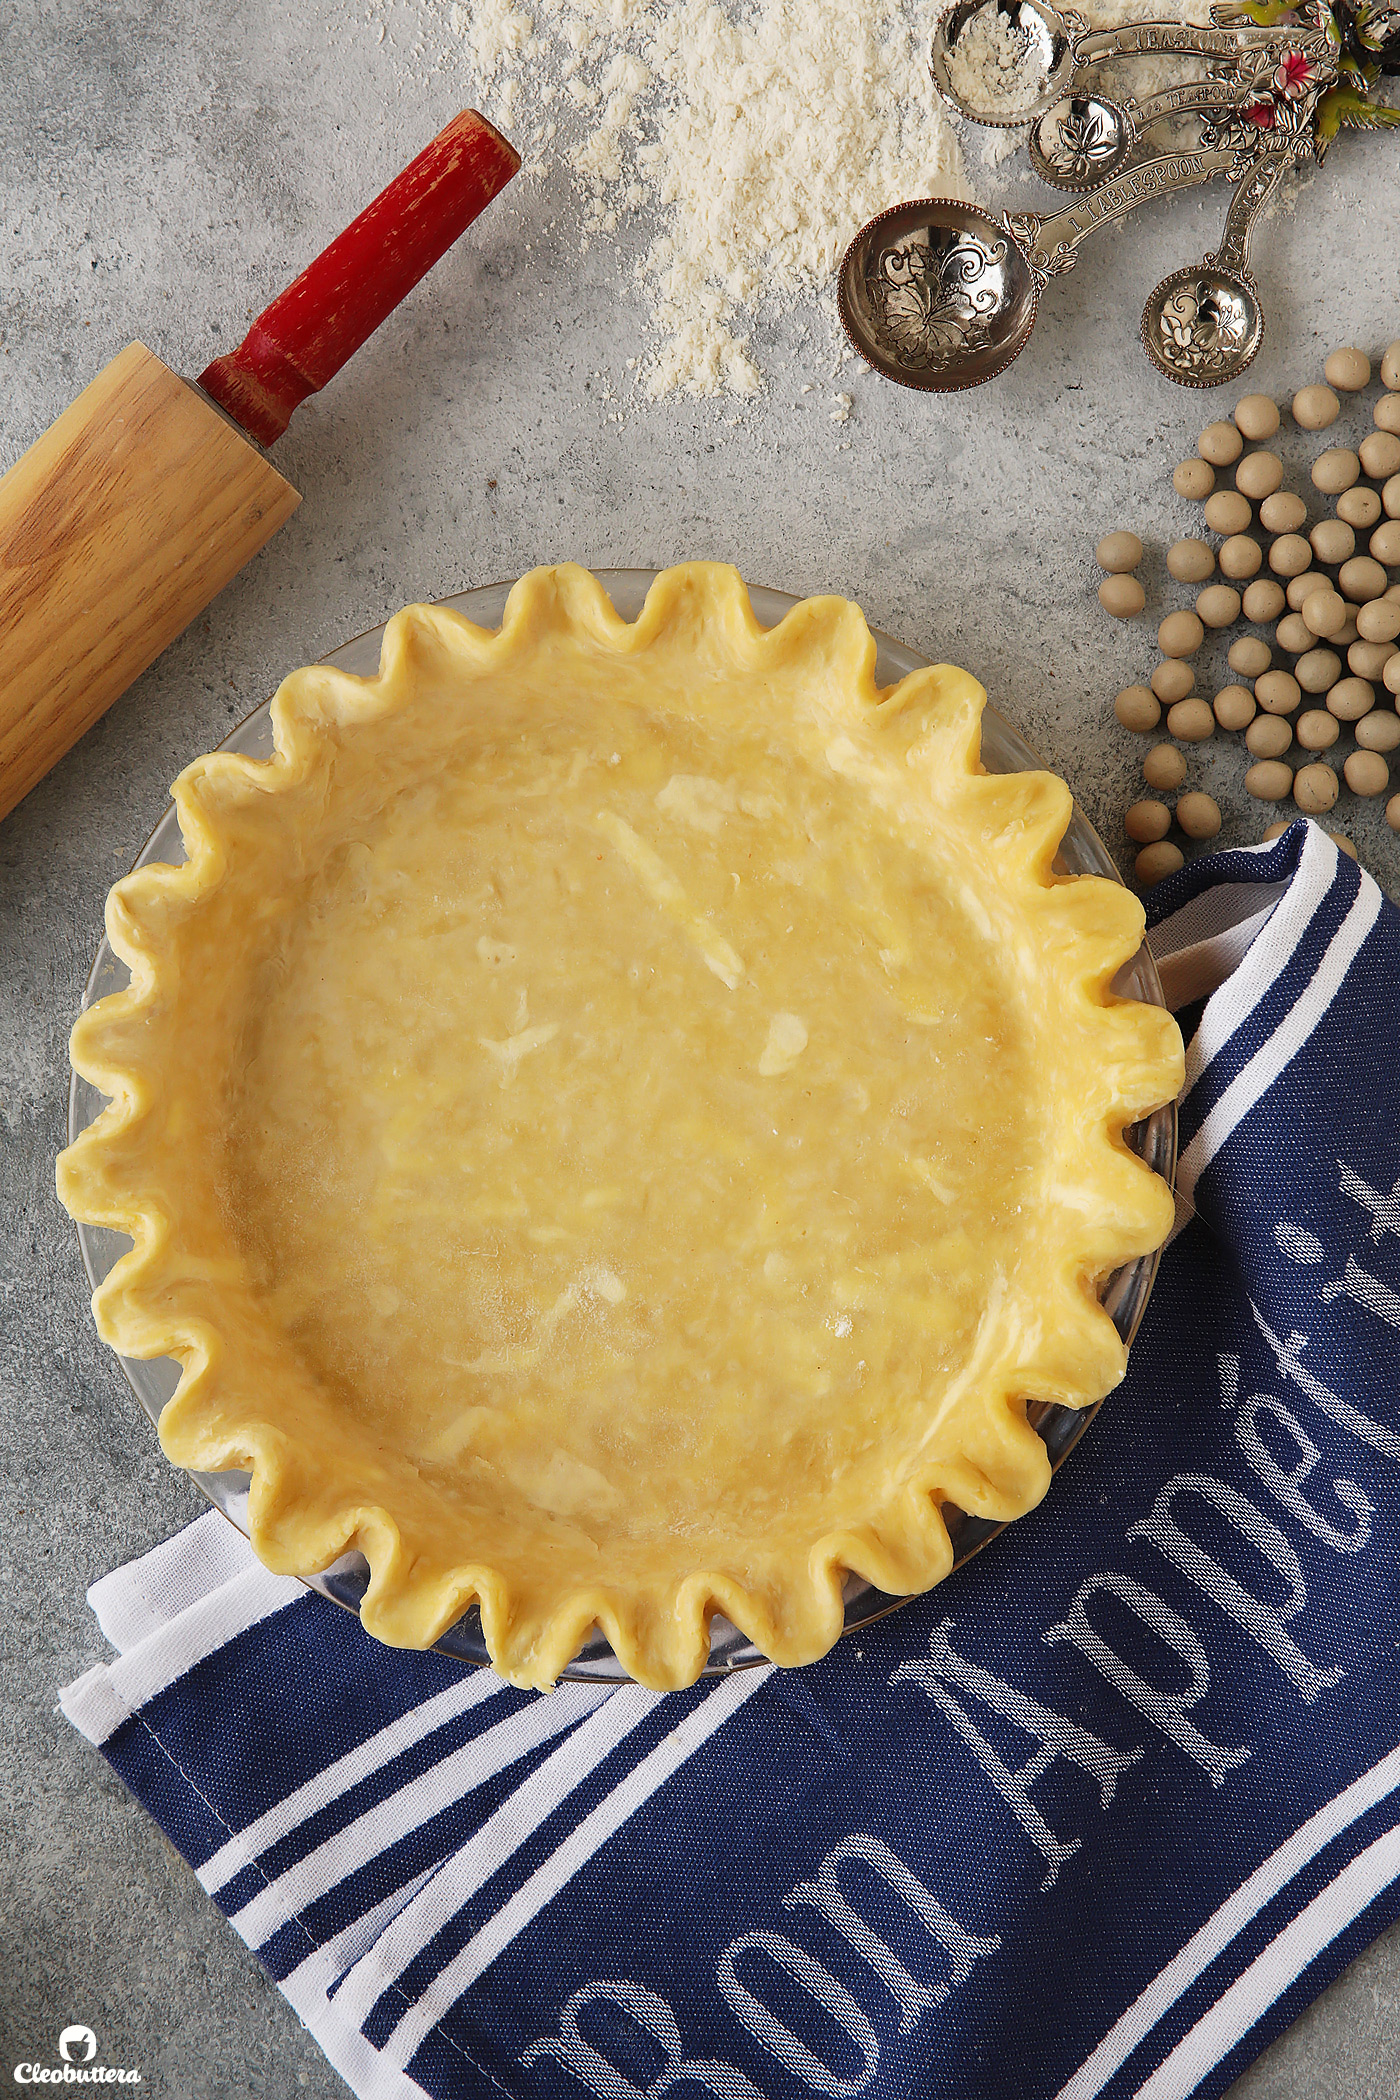 Foolproof All Butter Pie Crust - Baker by Nature